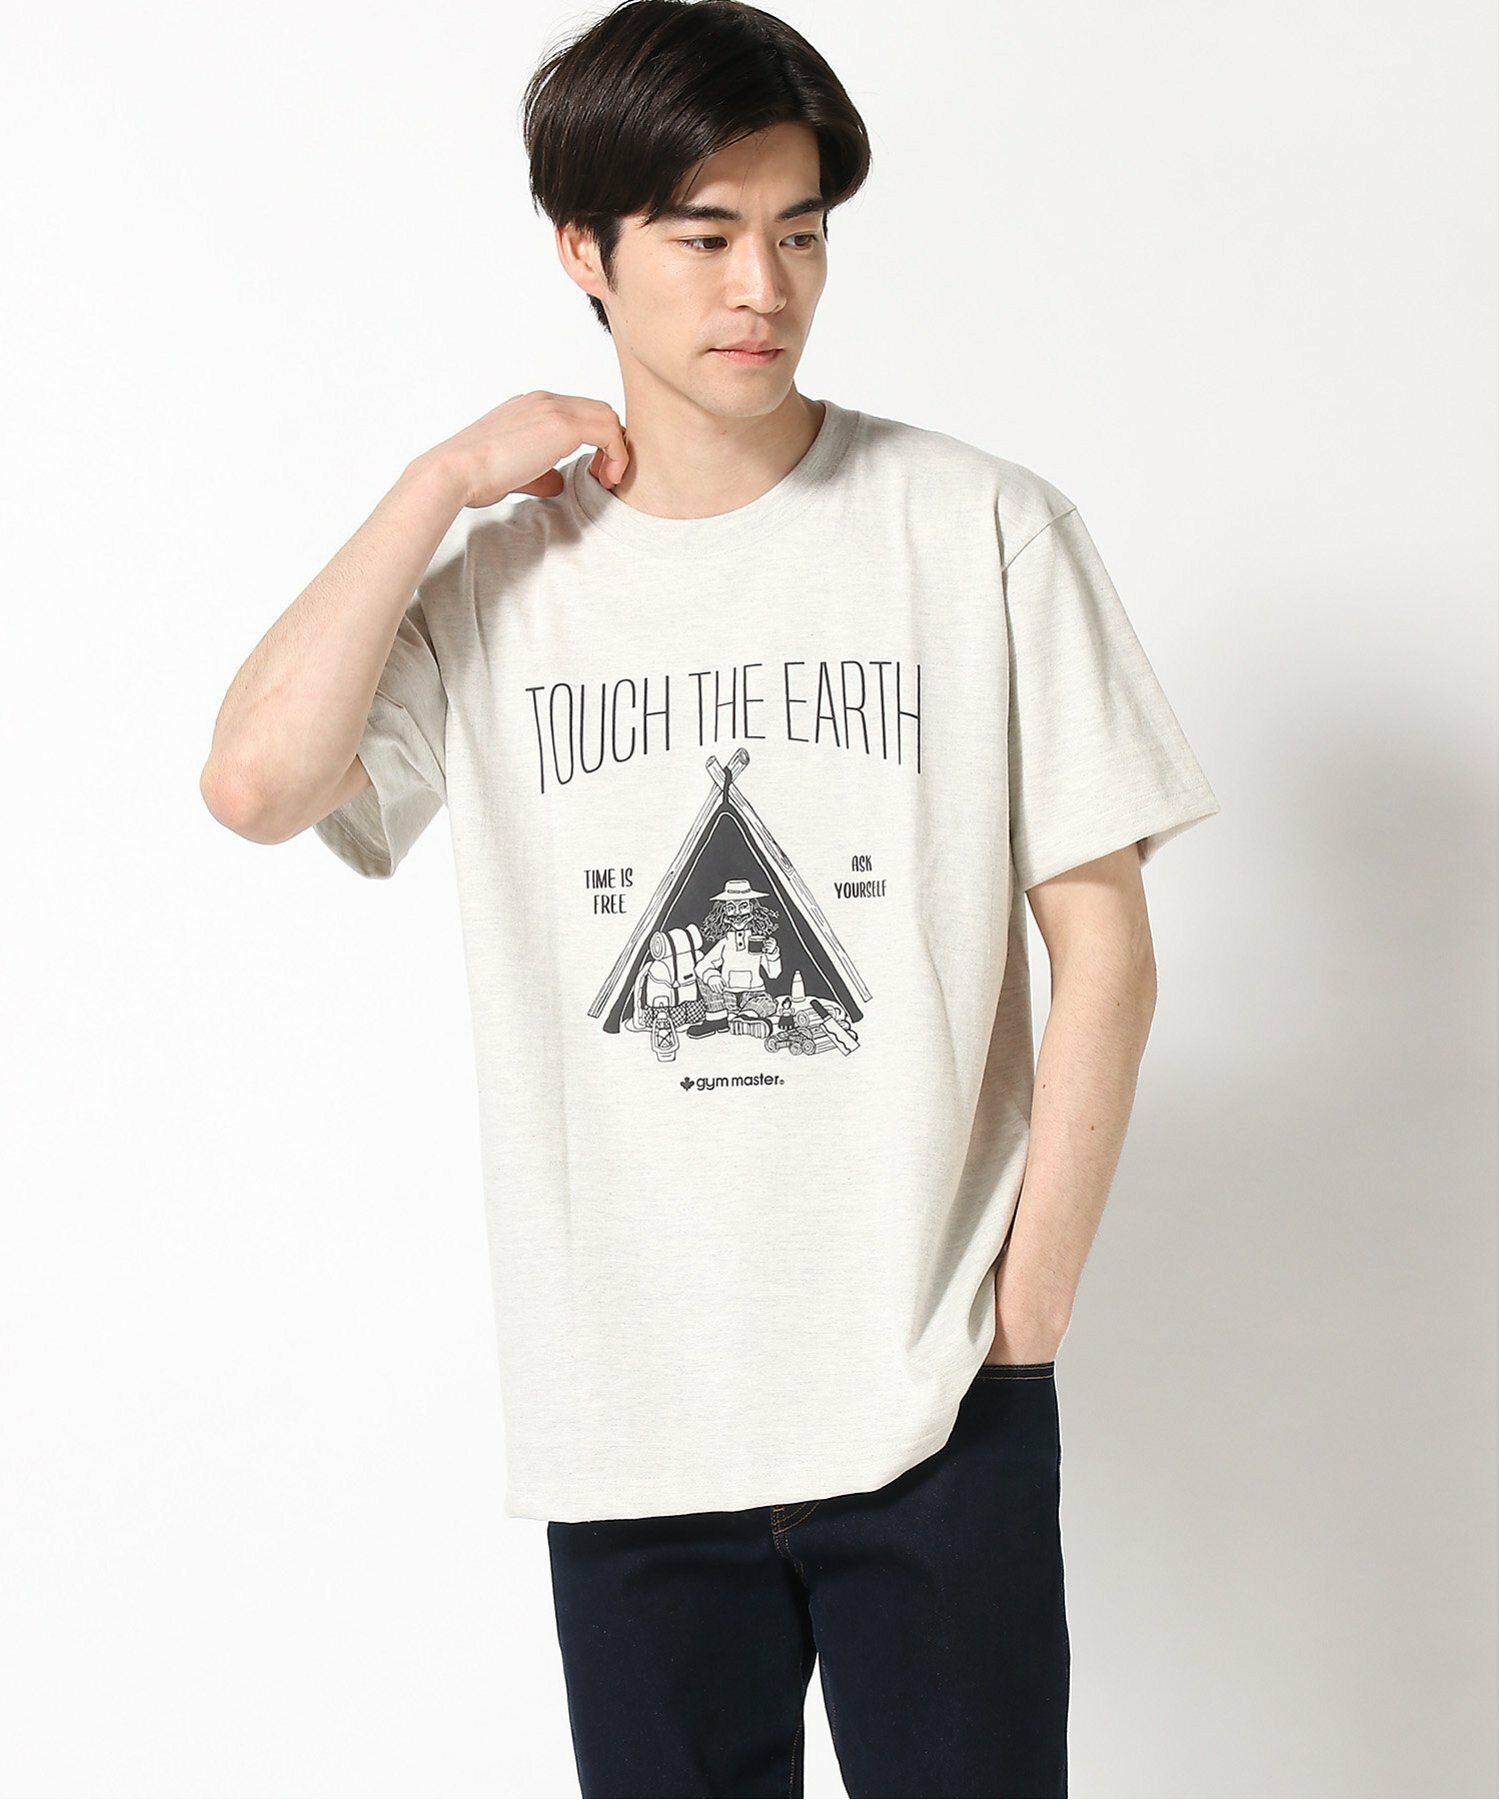 gym master/(U)5.6oz TOUCH THE EARTH Tee